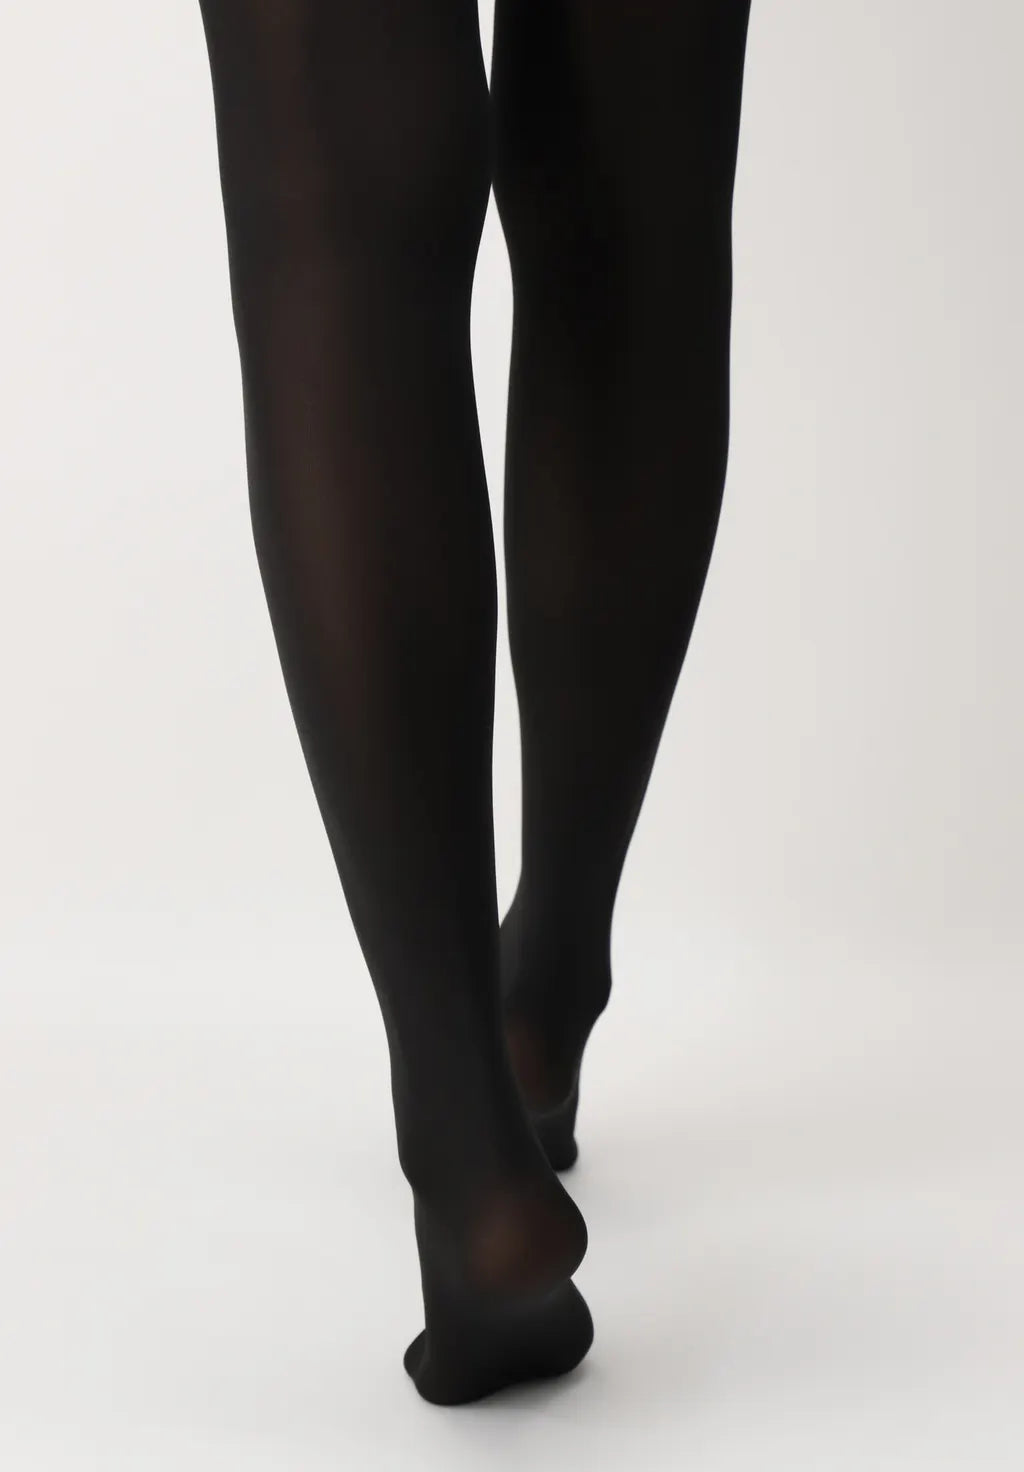 Oroblù Satin 60 Collant - Dressy black opaque tights with a satin sheen finish, hygienic gusset, flat seams and a deep comfort waistband.